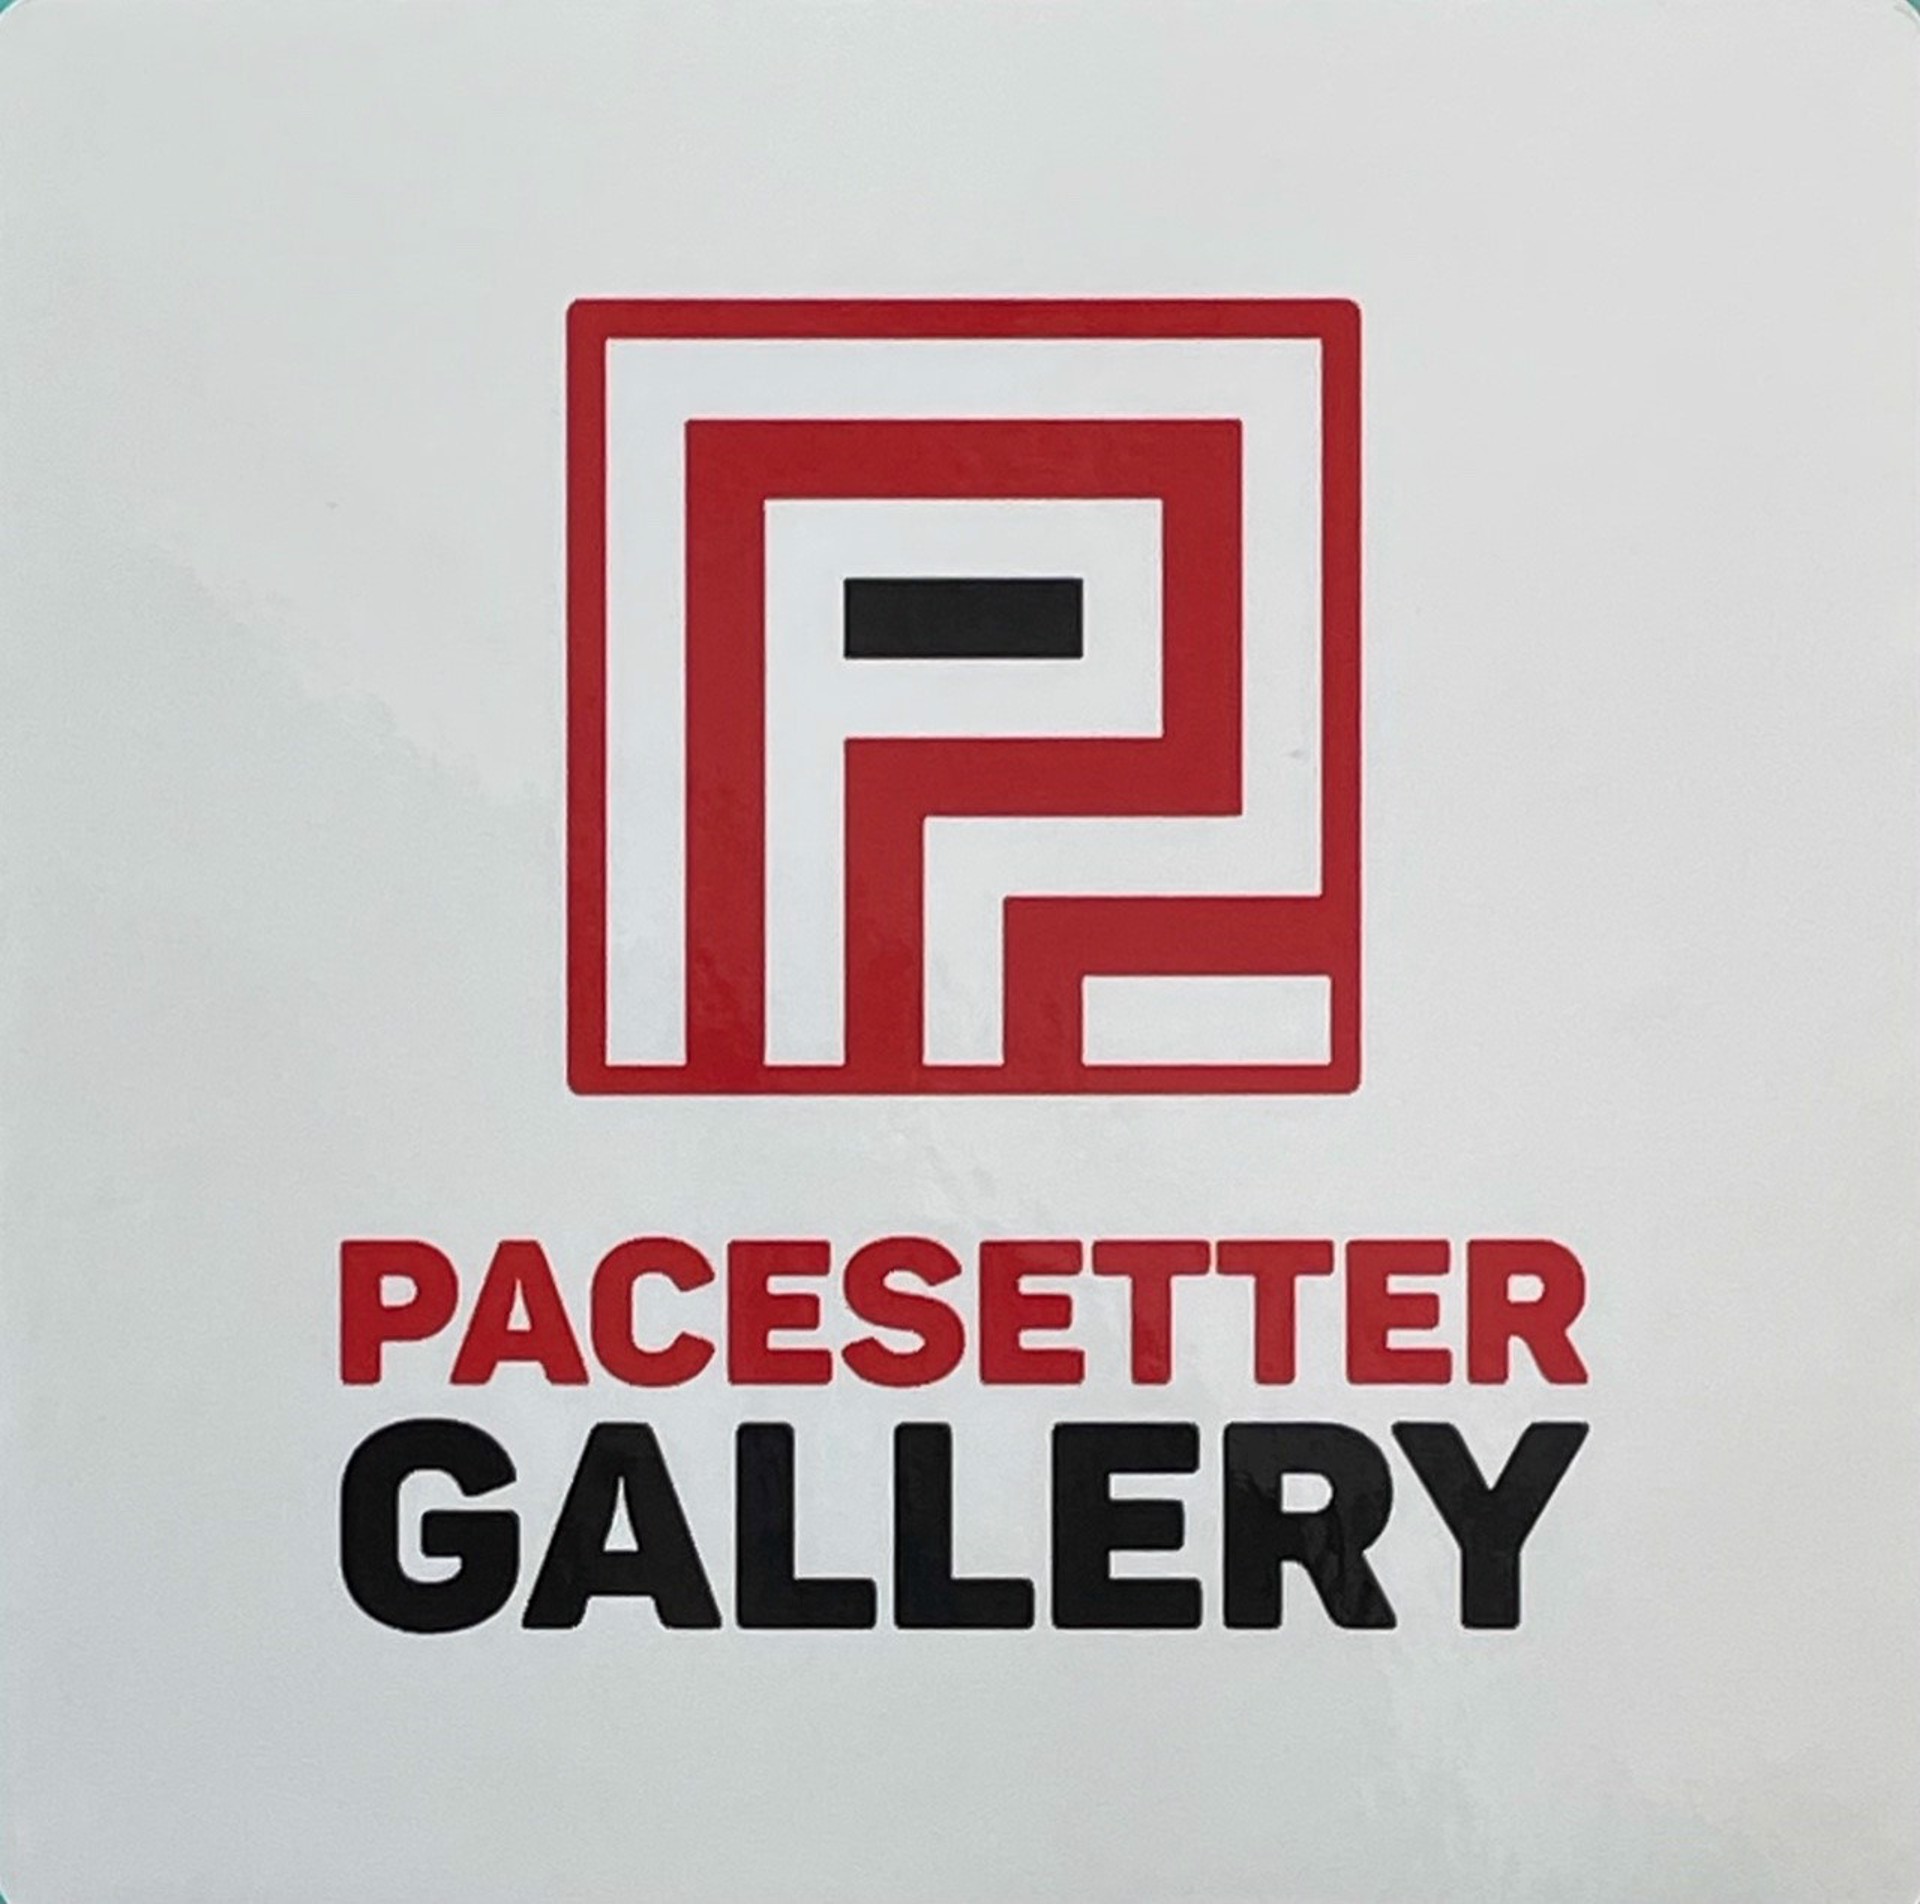 Pacesetter Gallery sticker 4"x4" by Pacesetter Merchandise